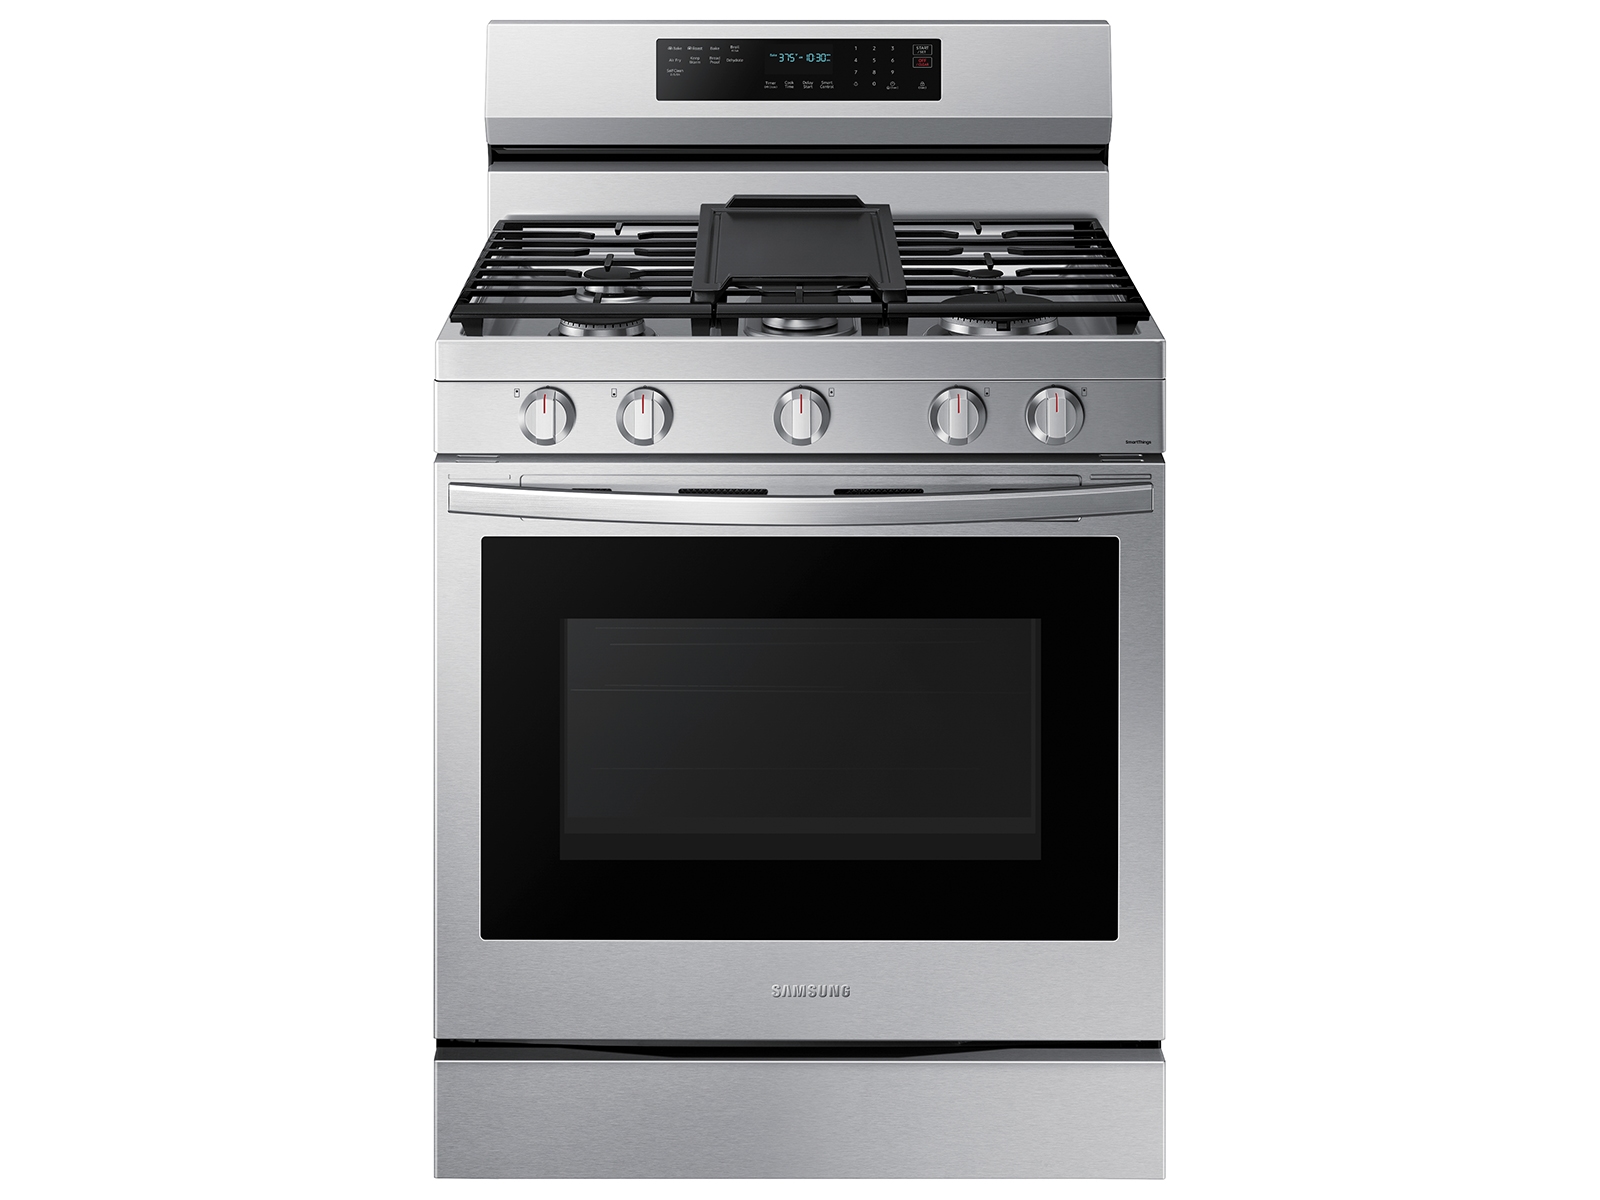 What's the Difference Between Stainless Steel and Black Stainless Steel?